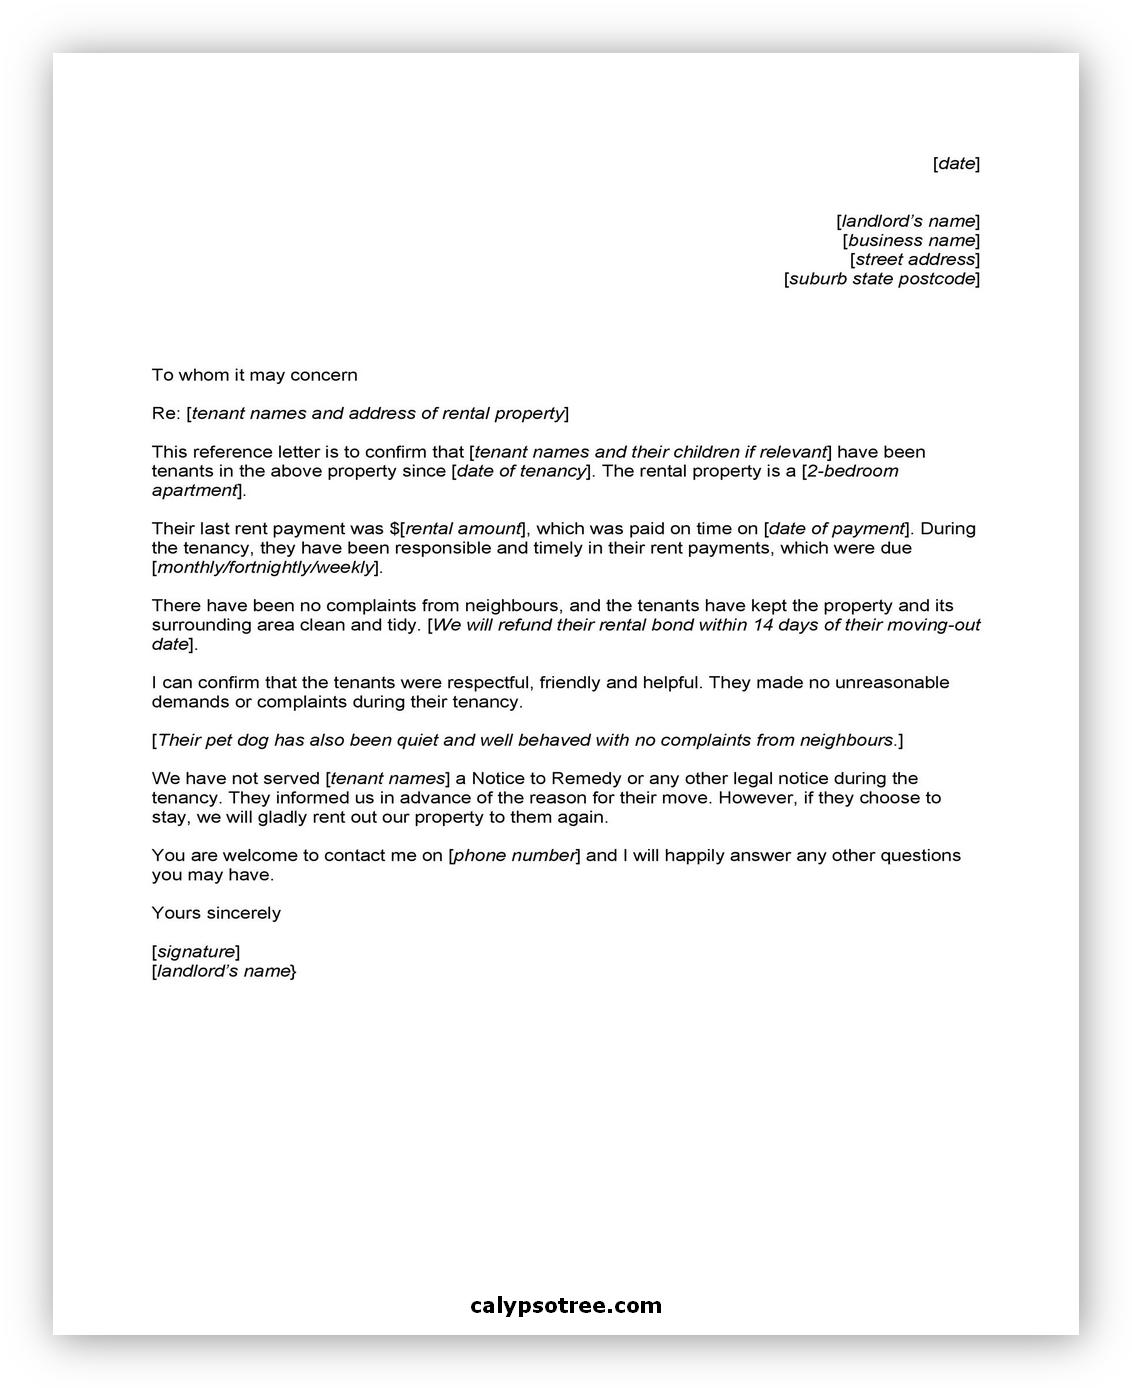 Letter of Recommendation Format 06